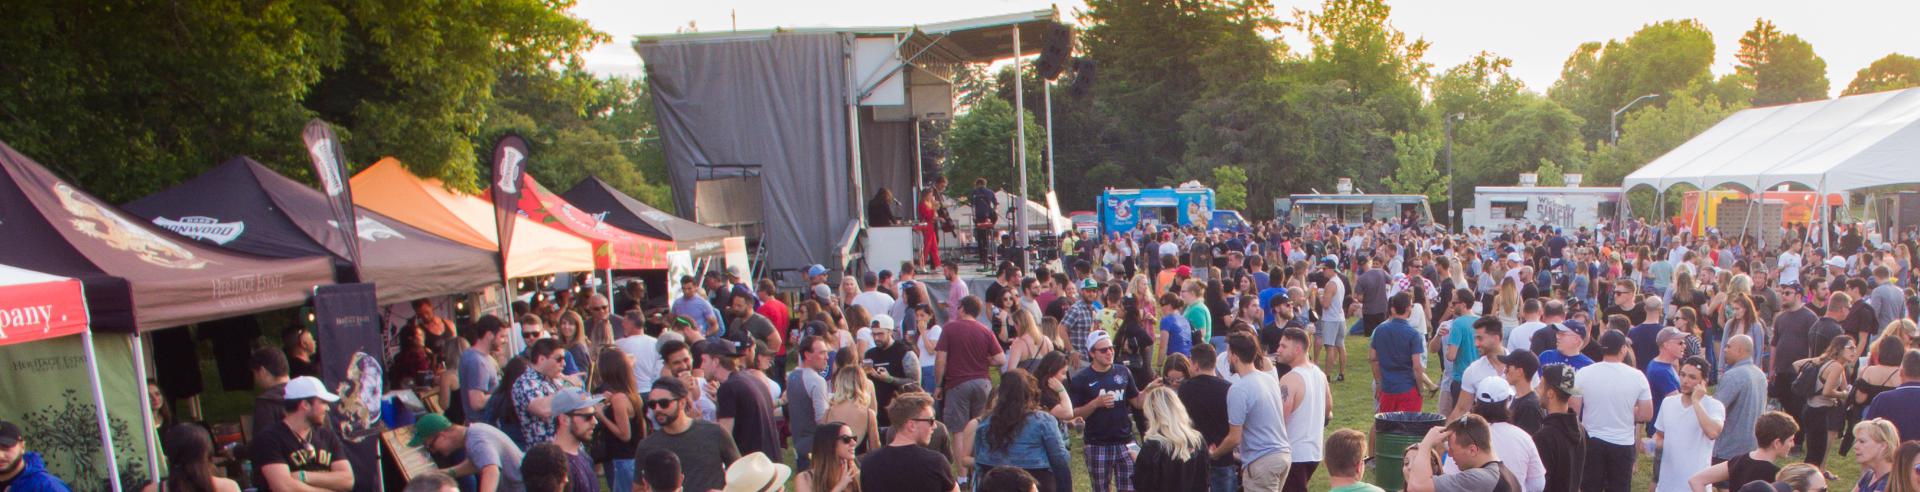 King City Craft Beer and Food Truck Festival Crowd